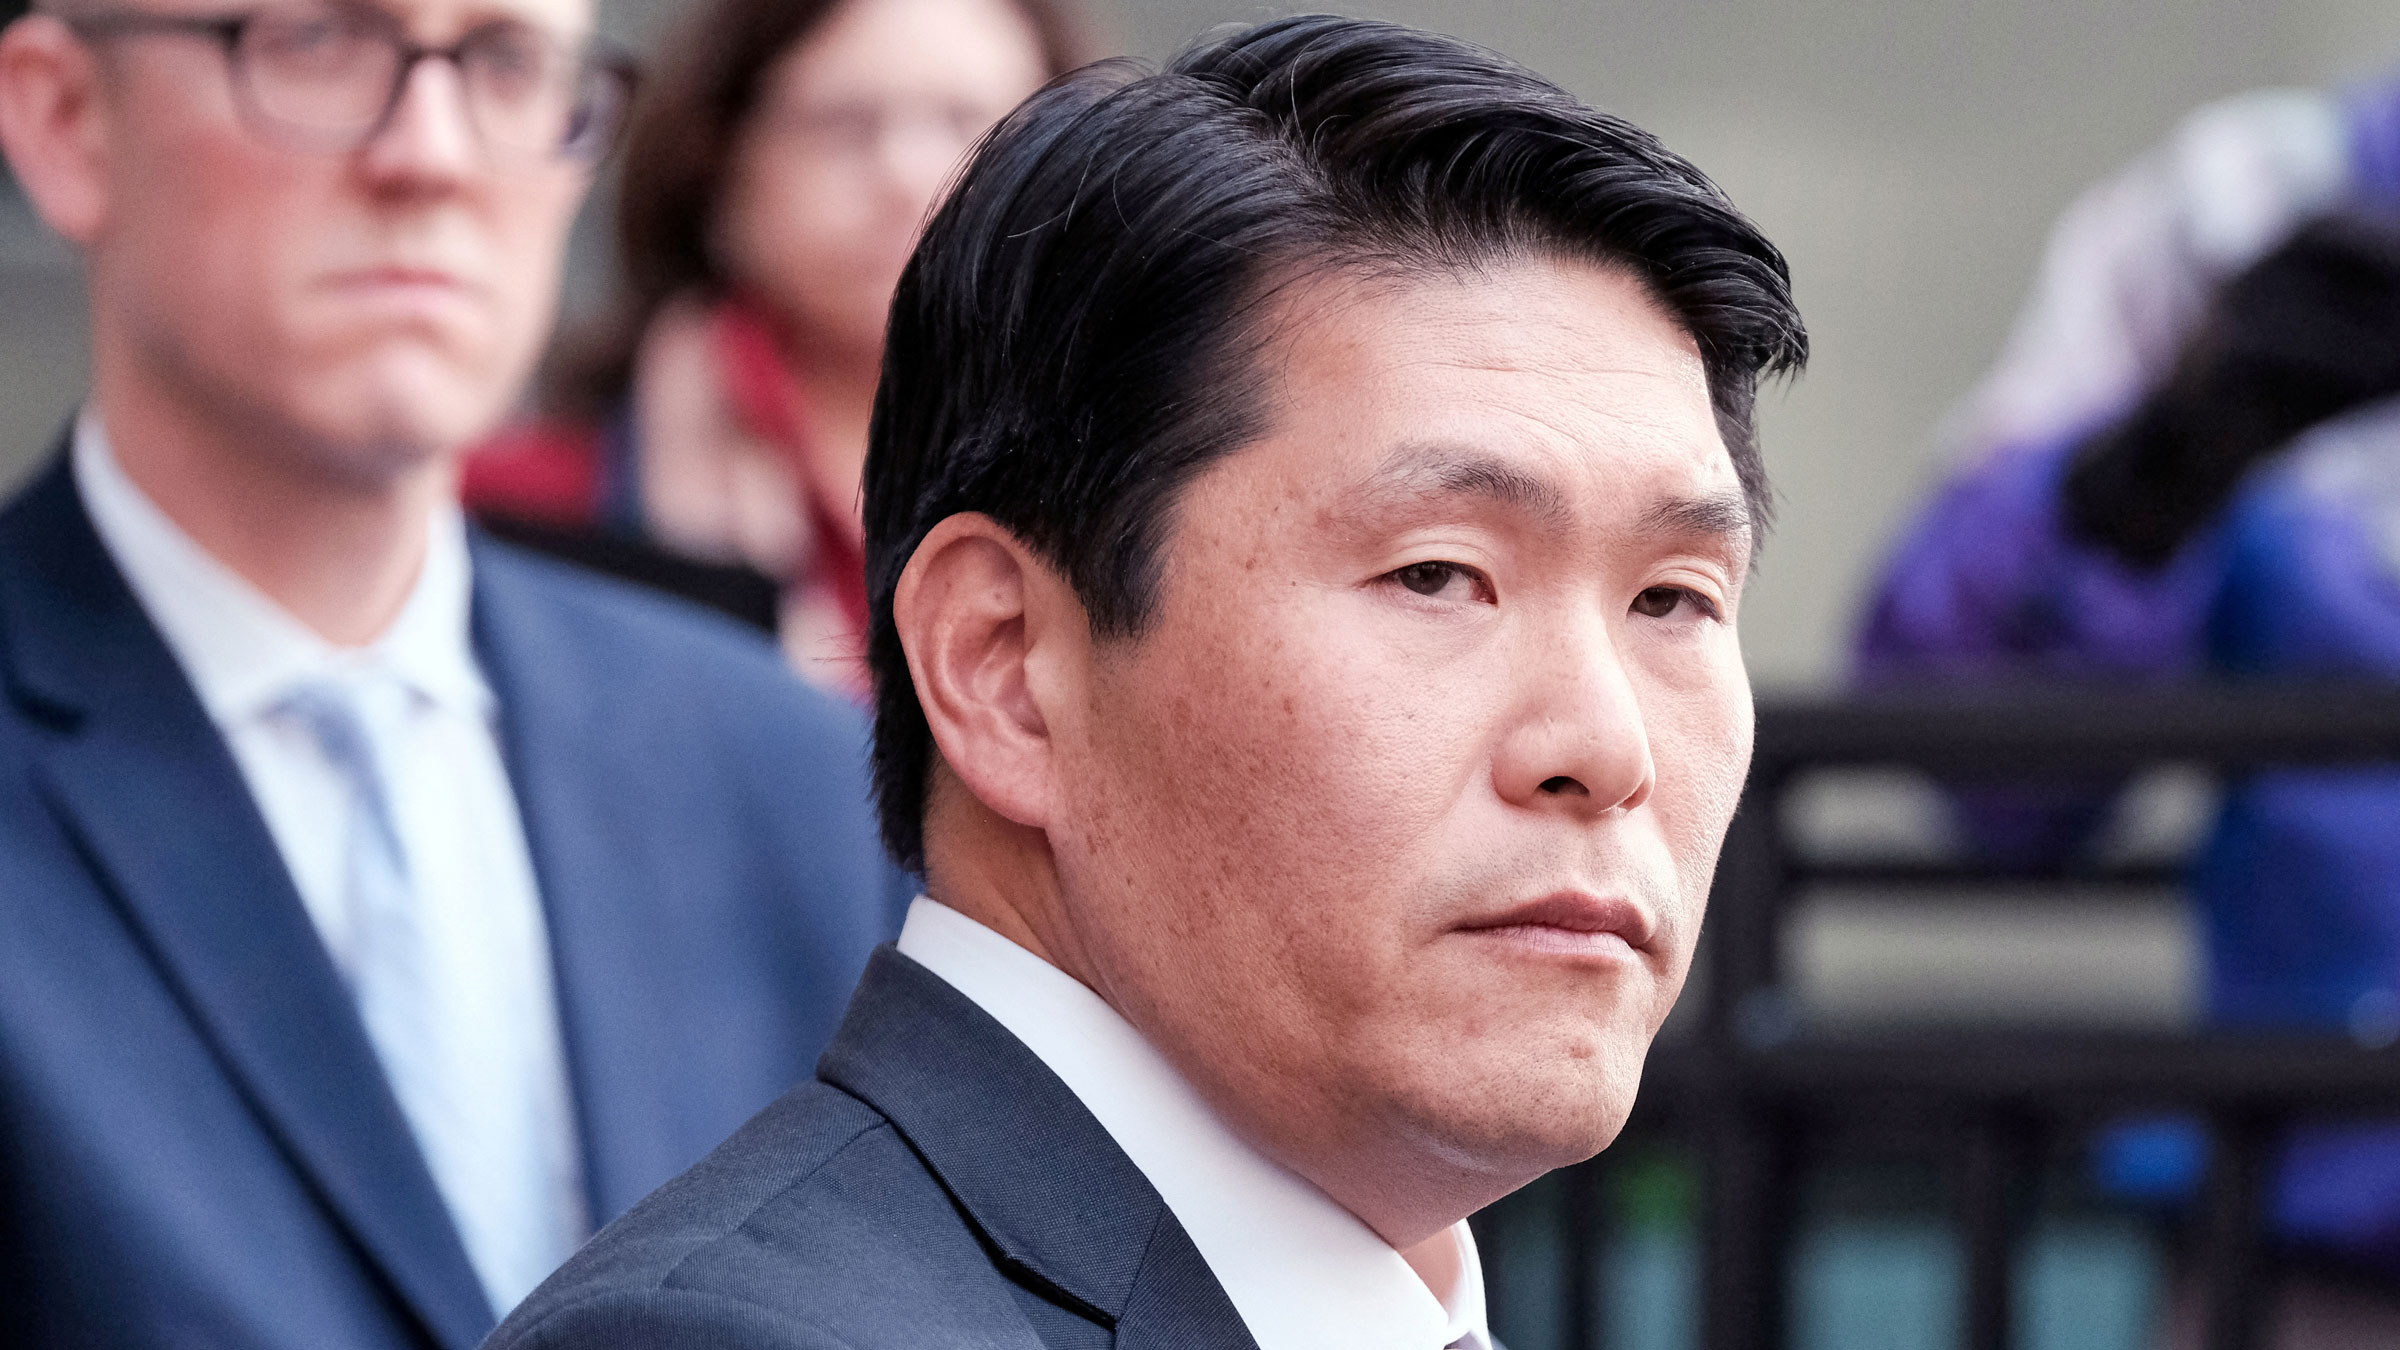 US Attorney Robert Hur reacts during a news conference in Baltimore in November 2019.